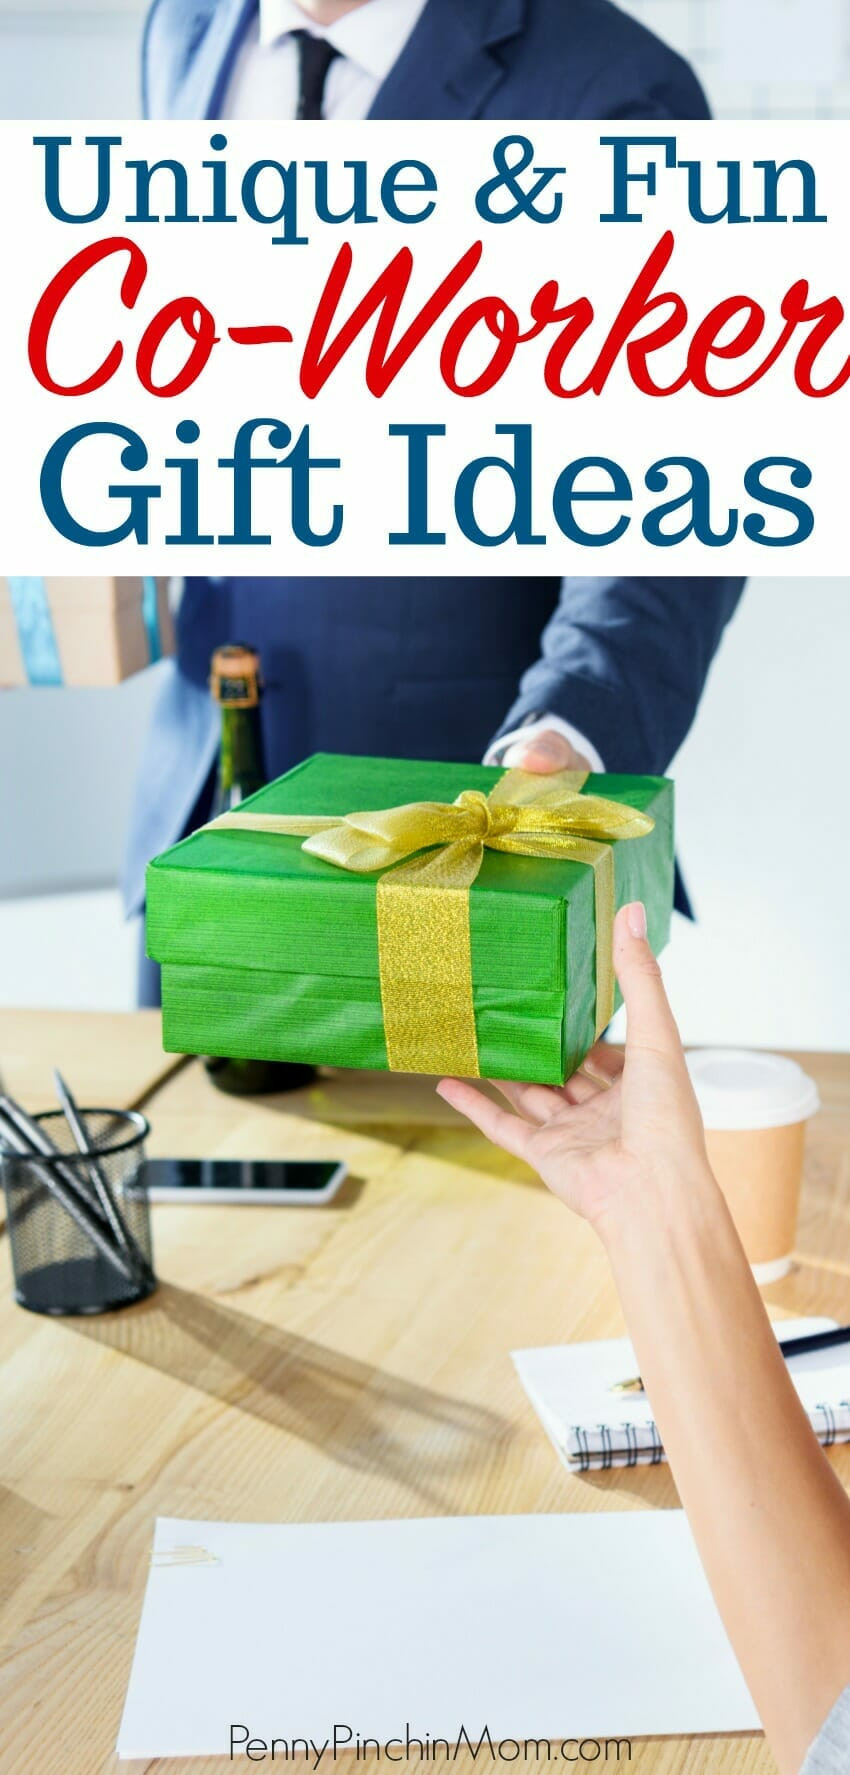 Holiday Gift Ideas For Employees
 Co Worker Gift Ideas for Anyone on Your List This Year